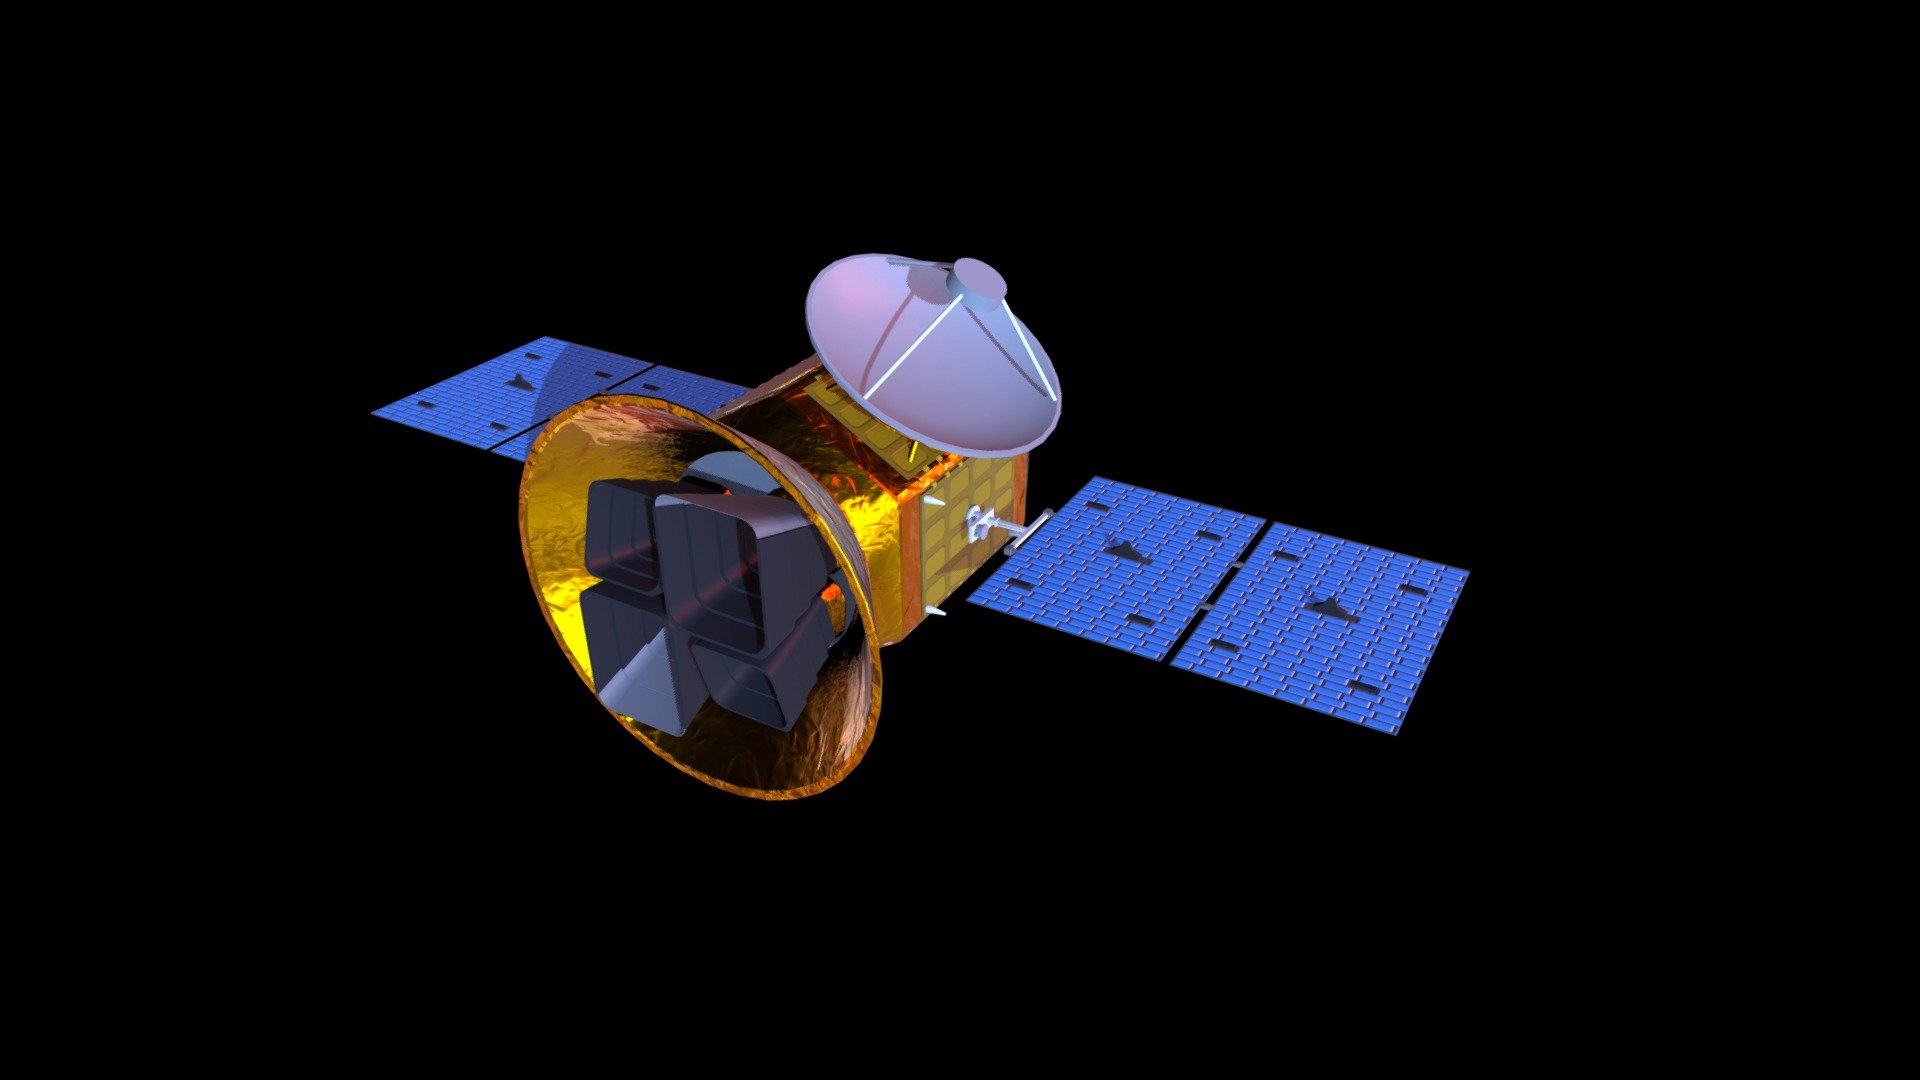 The Transiting Exoplanet Survey Satellite (TESS) is a space telescope for NASA's Explorers program, designed to search for exoplanets using the transit method in an area 400 times larger than that covered by the Kepler mission. It was launched on April 18, 2018 atop a Falcon 9 rocket. During its primary mission, it is expected to find more than 20,000 exoplanets, compared to about 3,800 exoplanets known when it launched 3d model